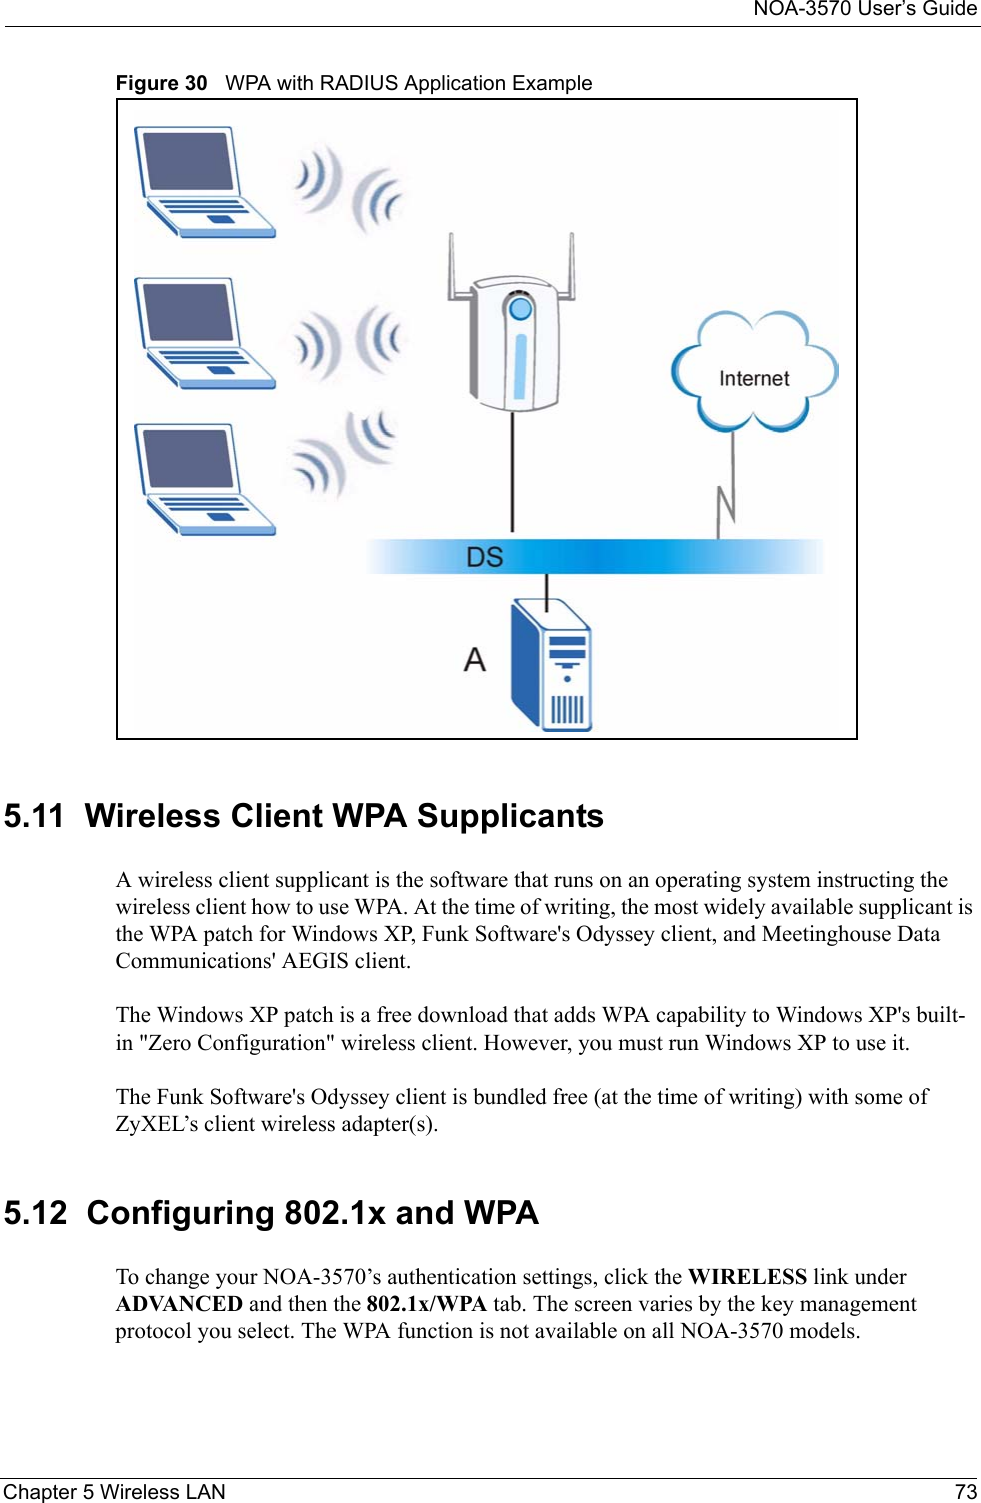 NOA-3570 User’s GuideChapter 5 Wireless LAN 73Figure 30   WPA with RADIUS Application Example5.11  Wireless Client WPA SupplicantsA wireless client supplicant is the software that runs on an operating system instructing the wireless client how to use WPA. At the time of writing, the most widely available supplicant is the WPA patch for Windows XP, Funk Software&apos;s Odyssey client, and Meetinghouse Data Communications&apos; AEGIS client.  The Windows XP patch is a free download that adds WPA capability to Windows XP&apos;s built-in &quot;Zero Configuration&quot; wireless client. However, you must run Windows XP to use it.  The Funk Software&apos;s Odyssey client is bundled free (at the time of writing) with some of ZyXEL’s client wireless adapter(s).  5.12  Configuring 802.1x and WPATo change your NOA-3570’s authentication settings, click the WIRELESS link under ADVANCED and then the 802.1x/WPA tab. The screen varies by the key management protocol you select. The WPA function is not available on all NOA-3570 models.